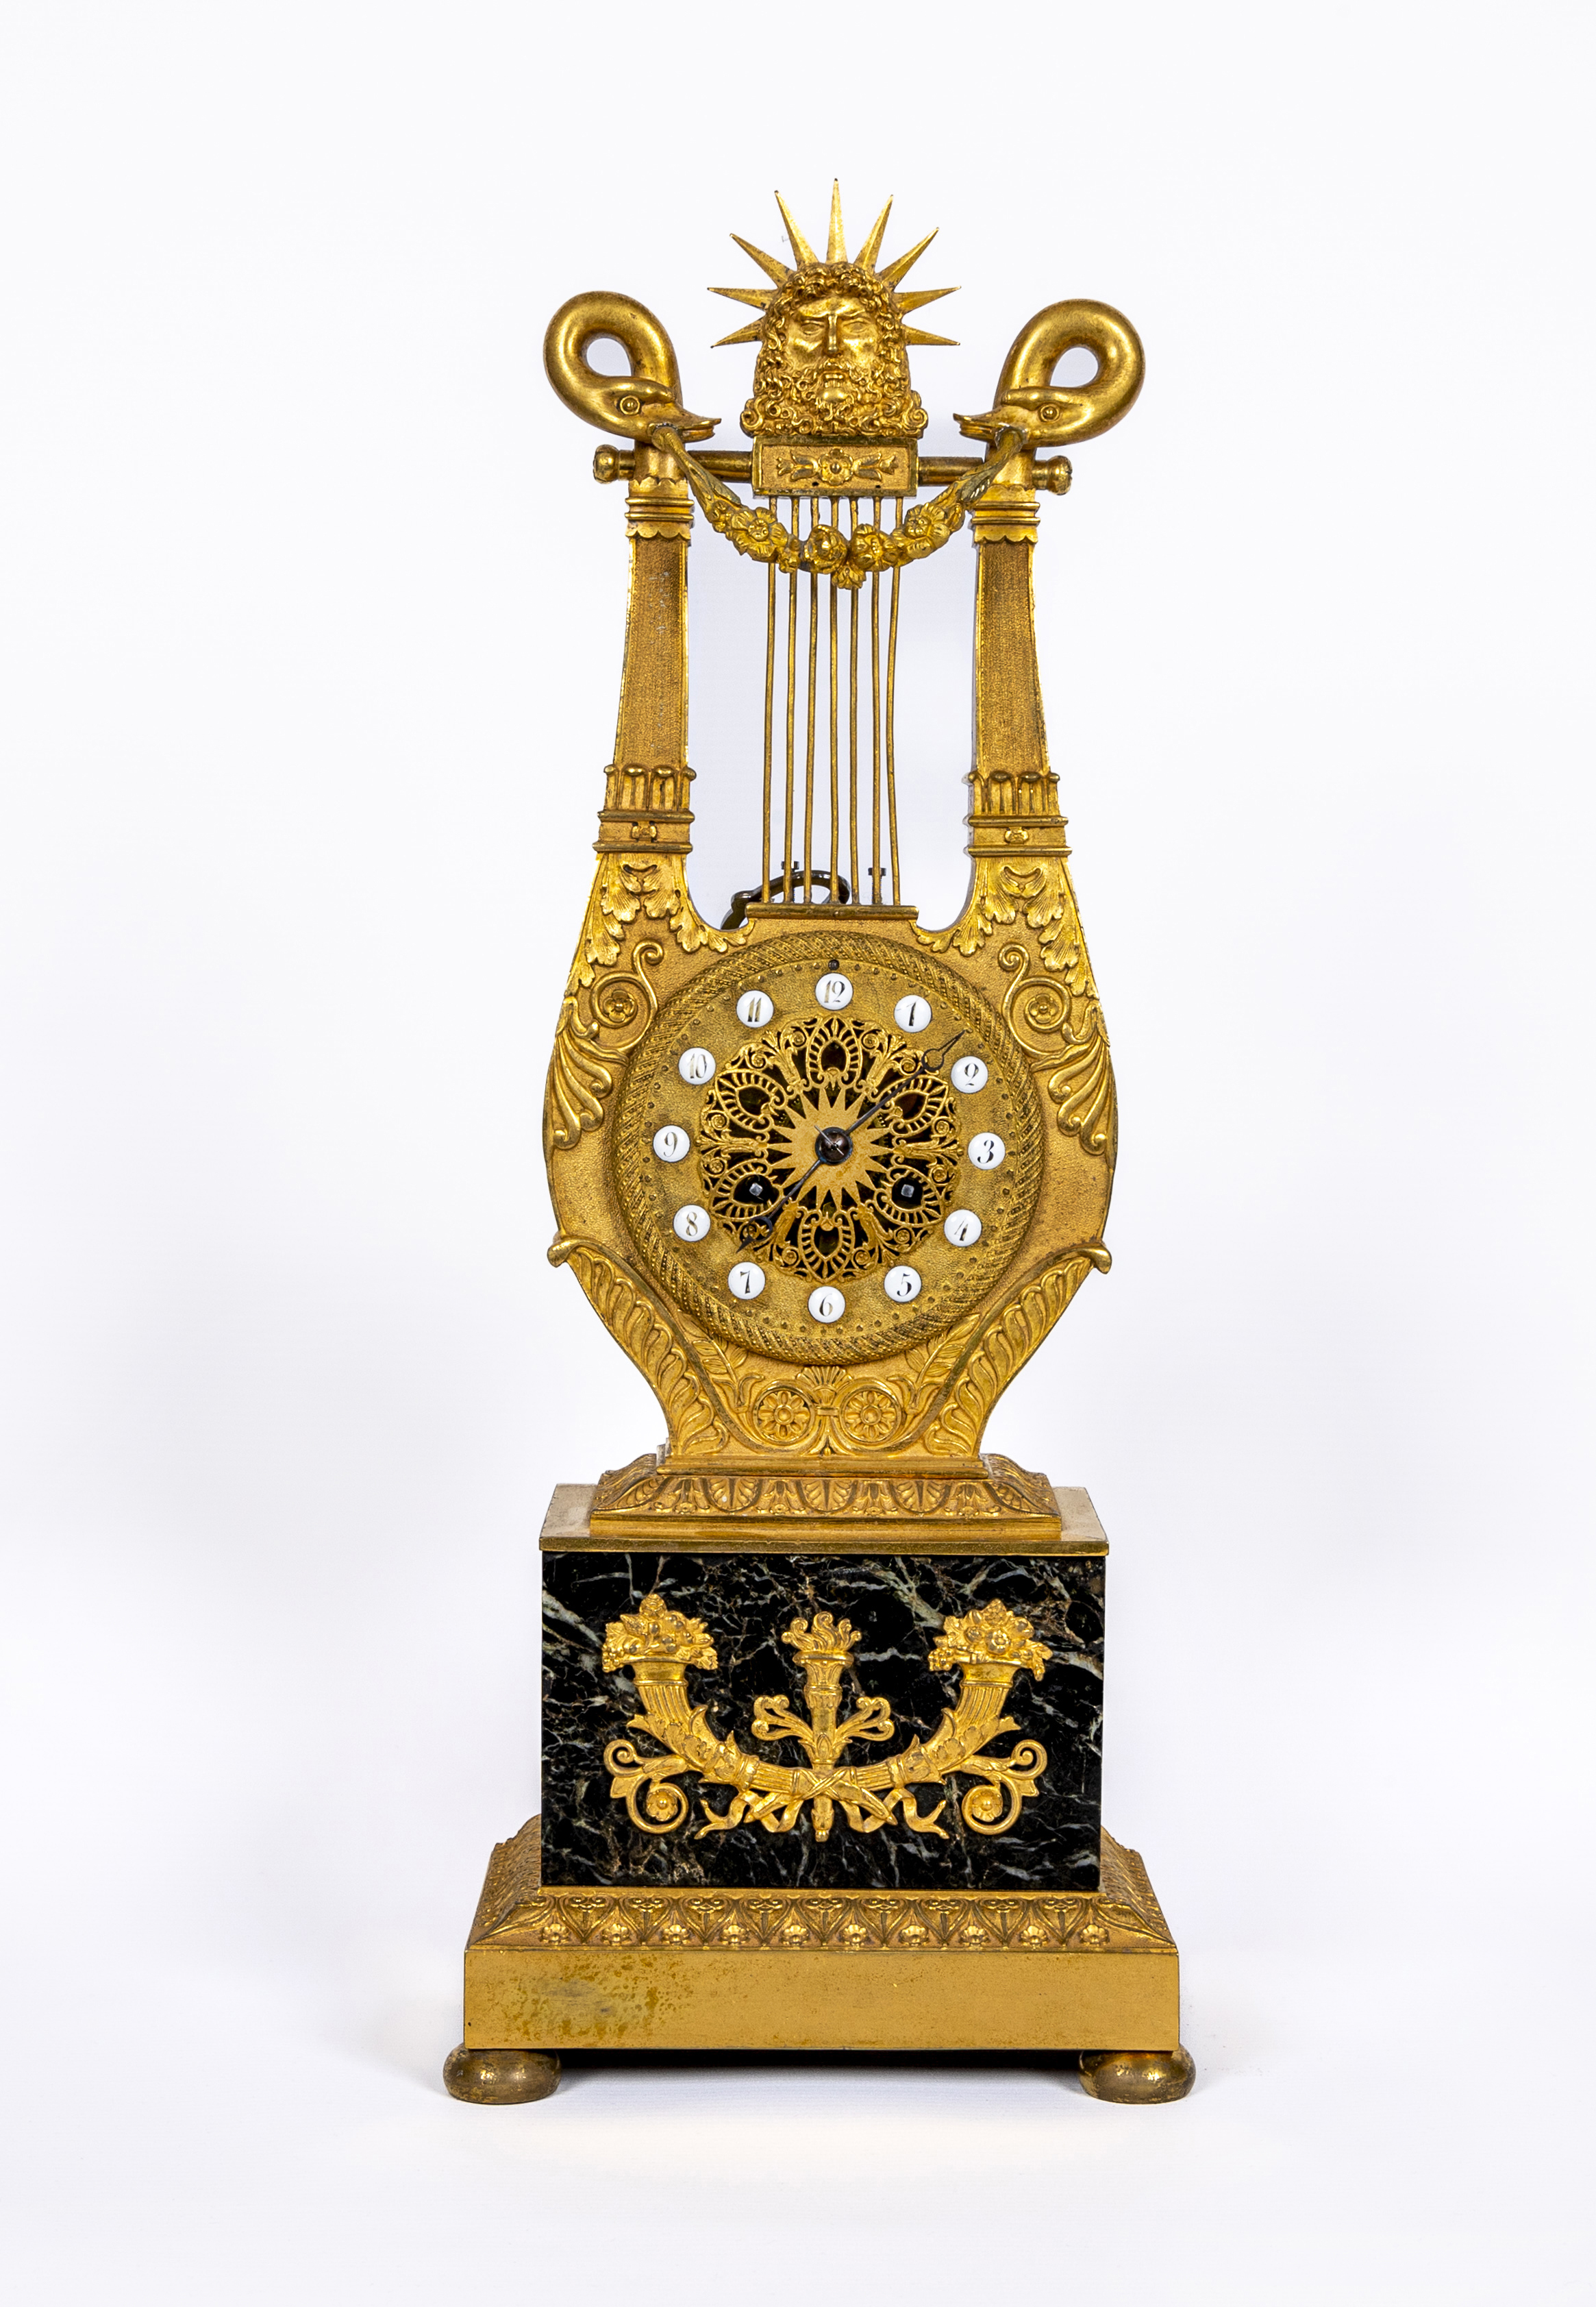 A LOUIS XVI STYLE GILT METAL LYRE MANTEL CLOCK, mid 19th century, the twin barrel movement with